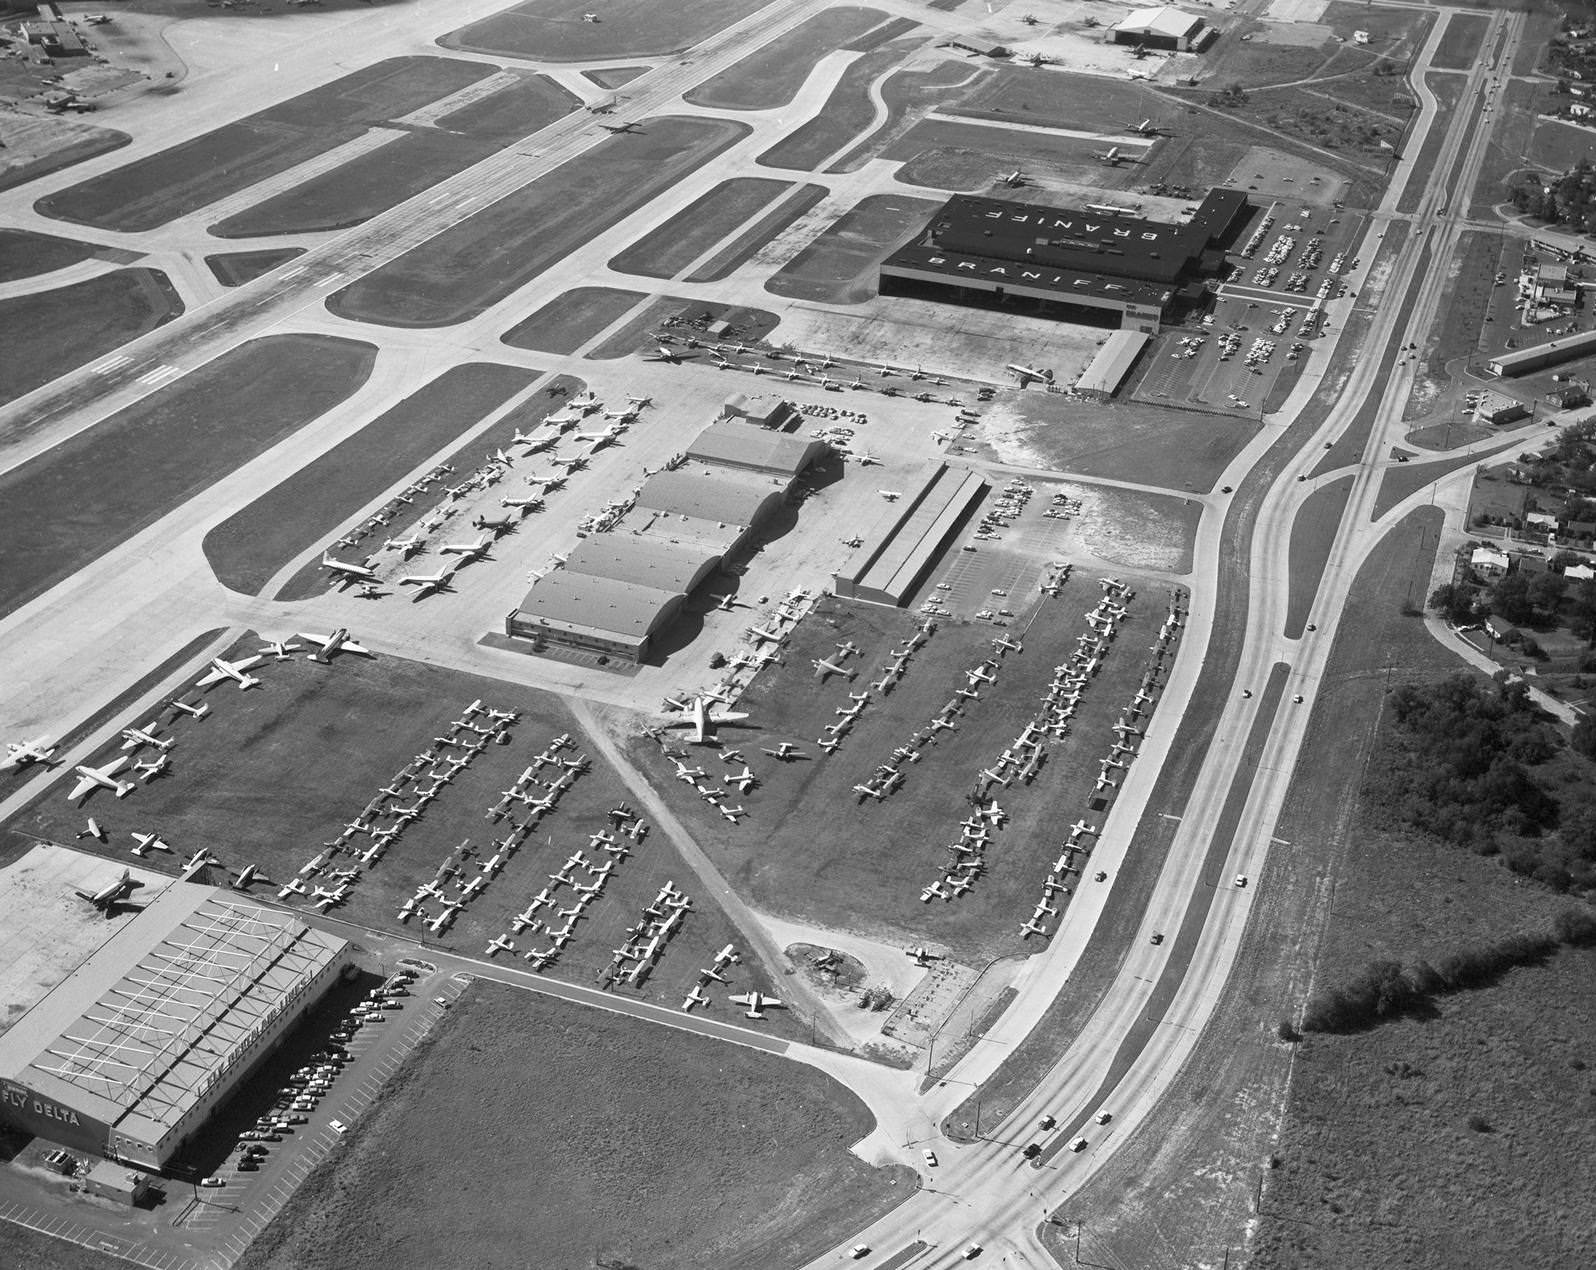 Aerial of Southwest Airmotive at Dallas Love Field, 1950